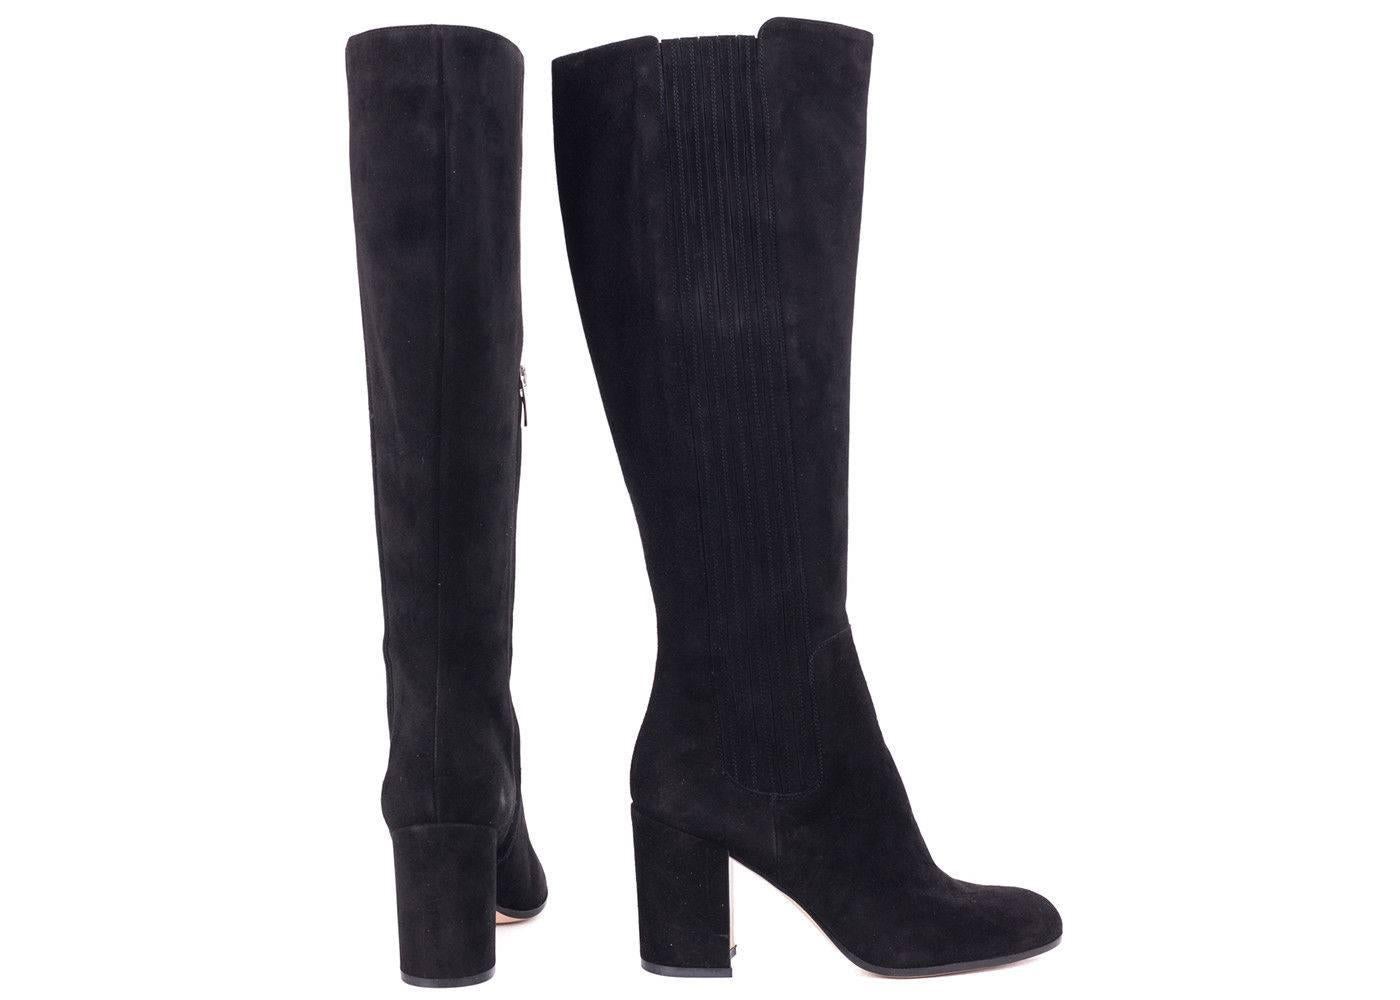 Gianvito Rossi Black Suede Side Panel Asymmetrical Tall Boots In New Condition For Sale In Brooklyn, NY